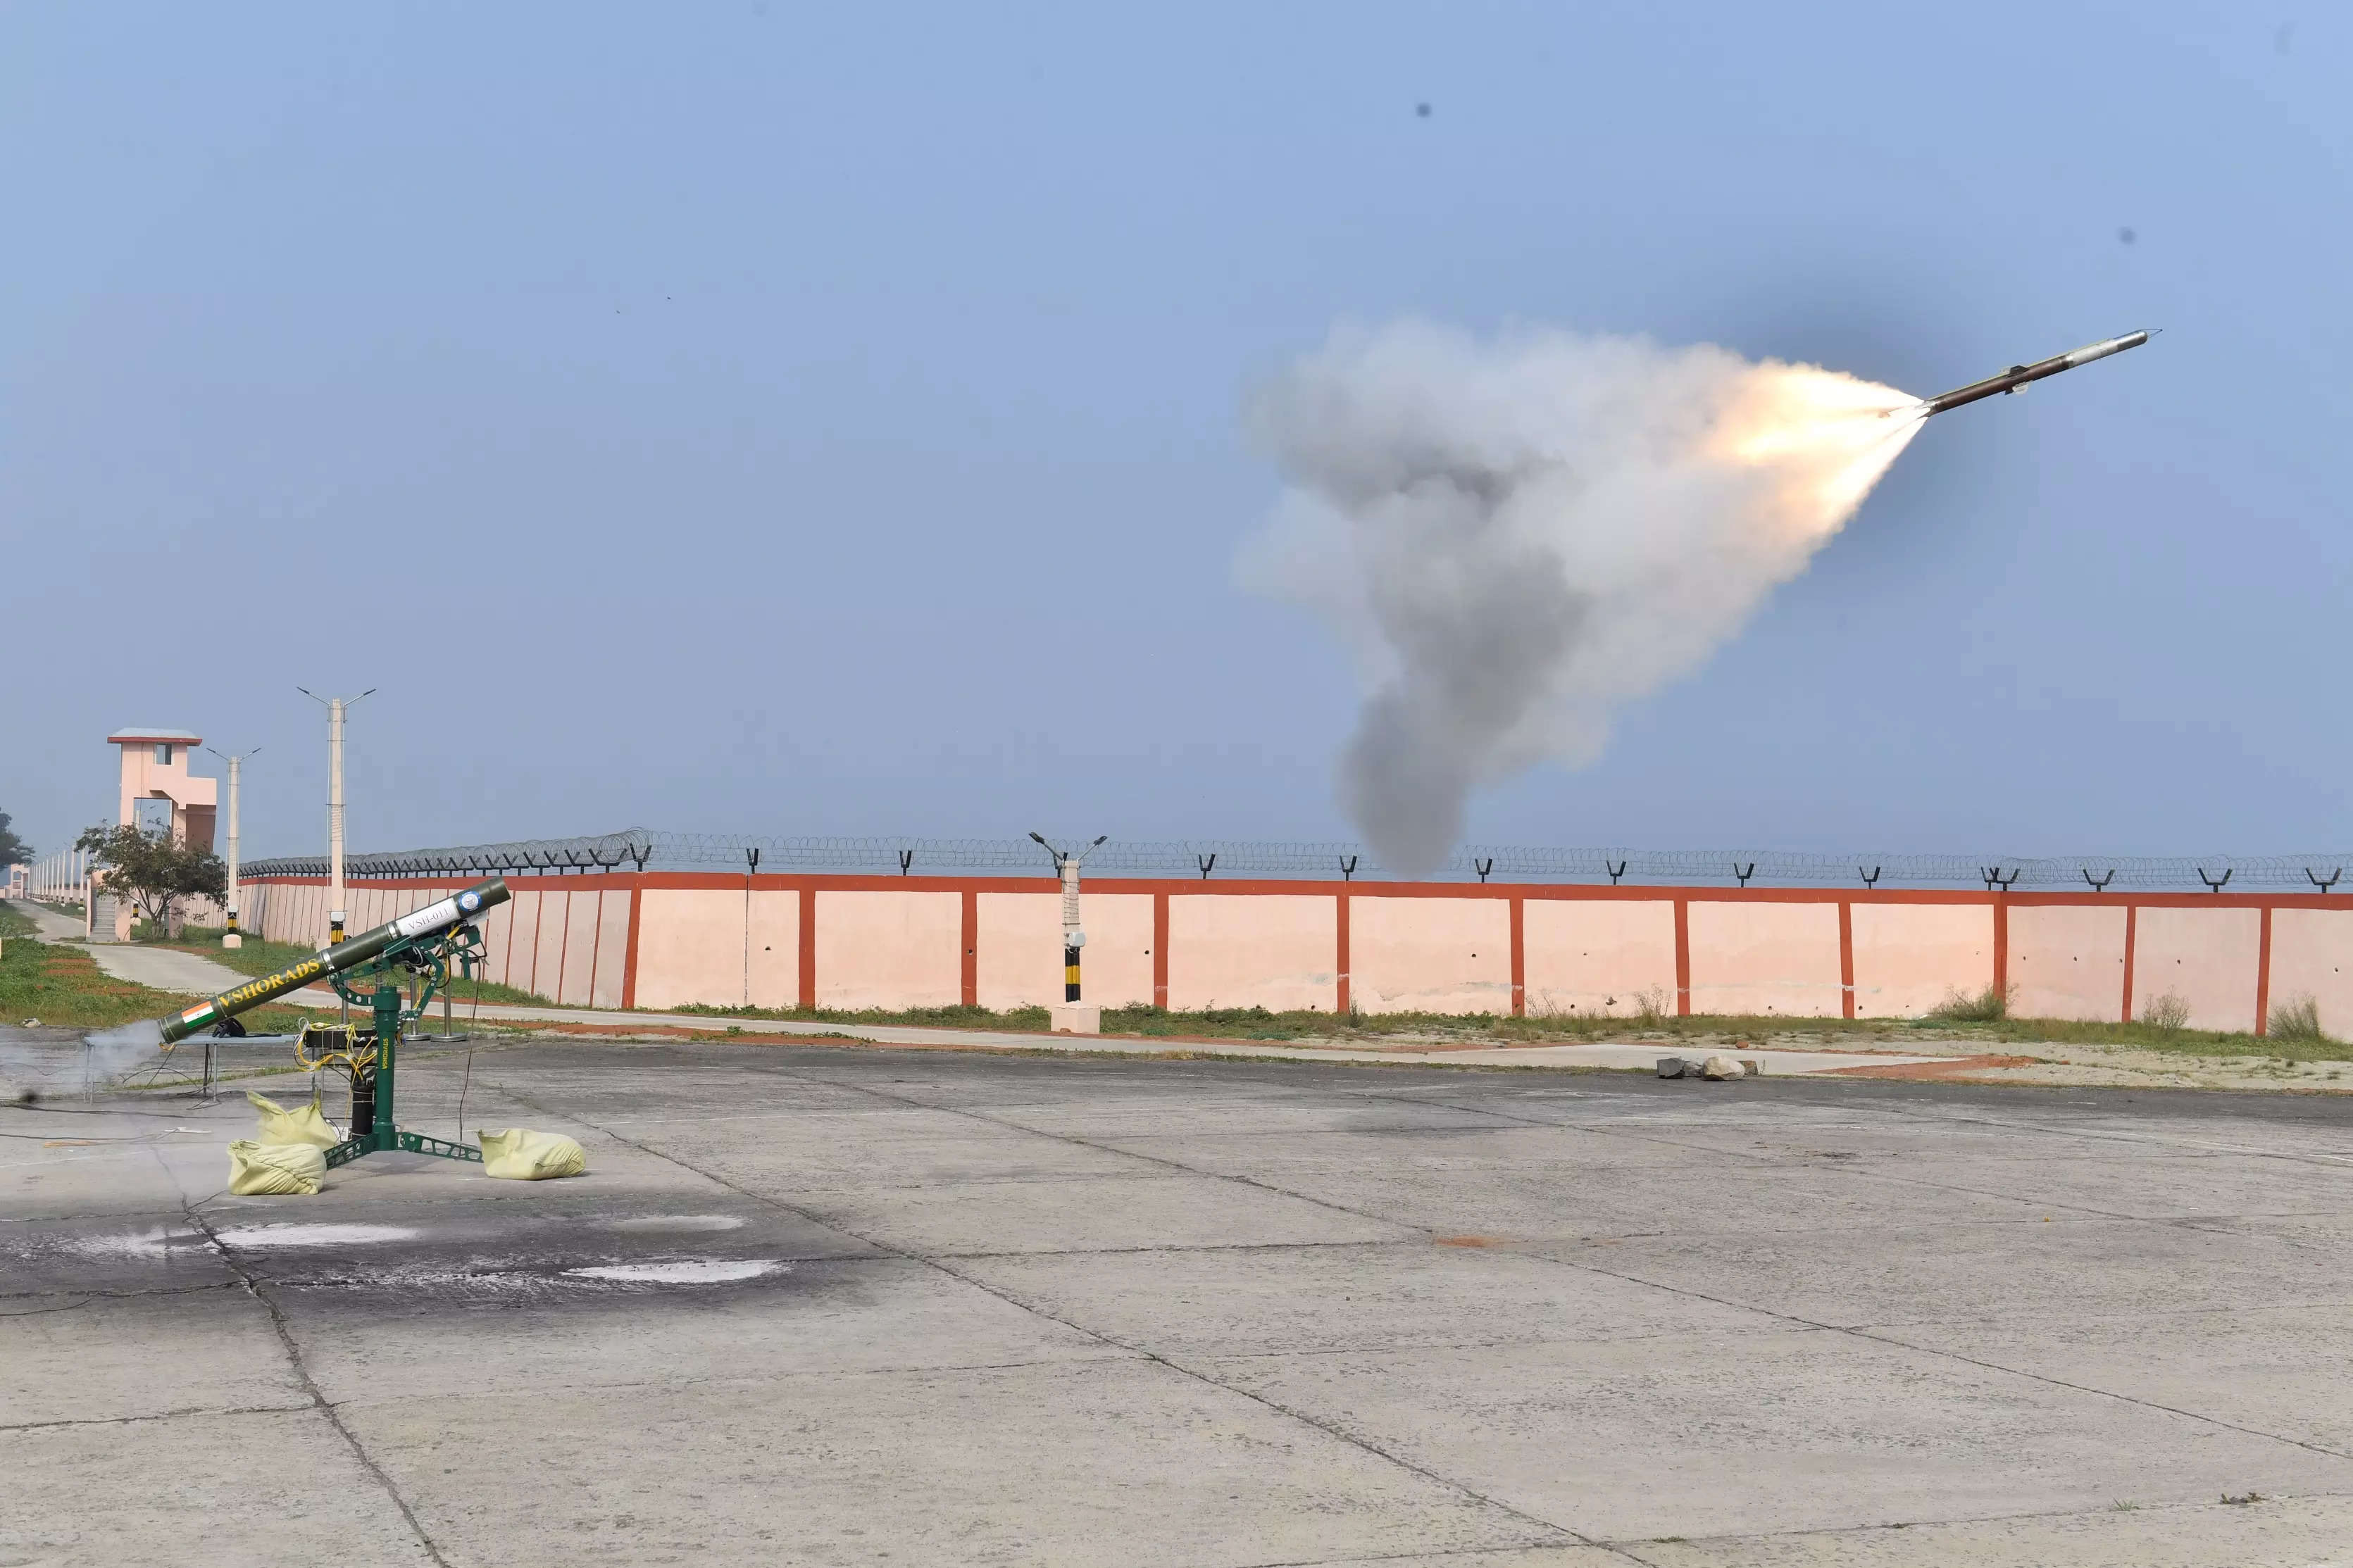 india successfully tests indigenous vshorads missile system, enhancing air defence capabilities